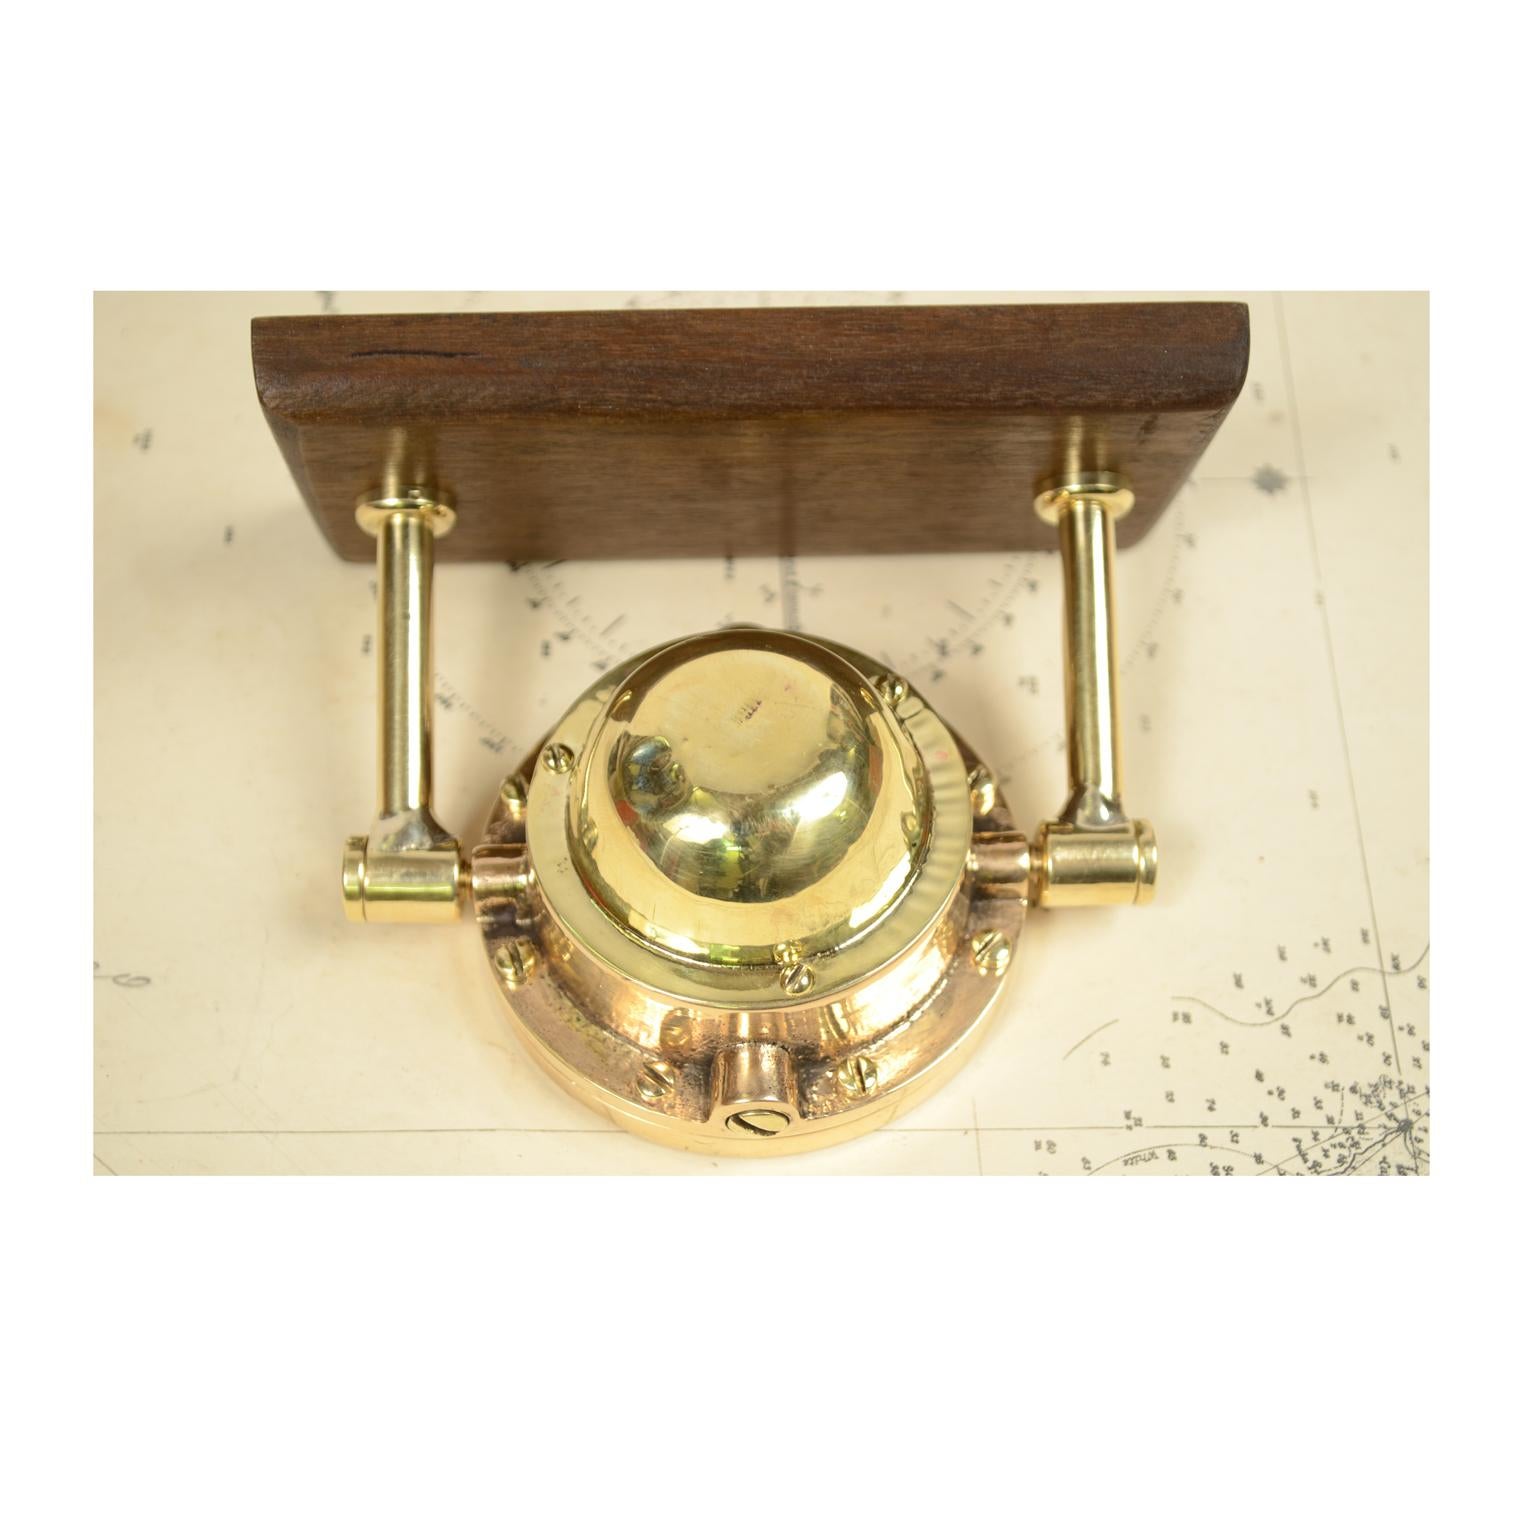 American Compass from the Early 1900s Made of Brass Mounted on a Walnut Board 2